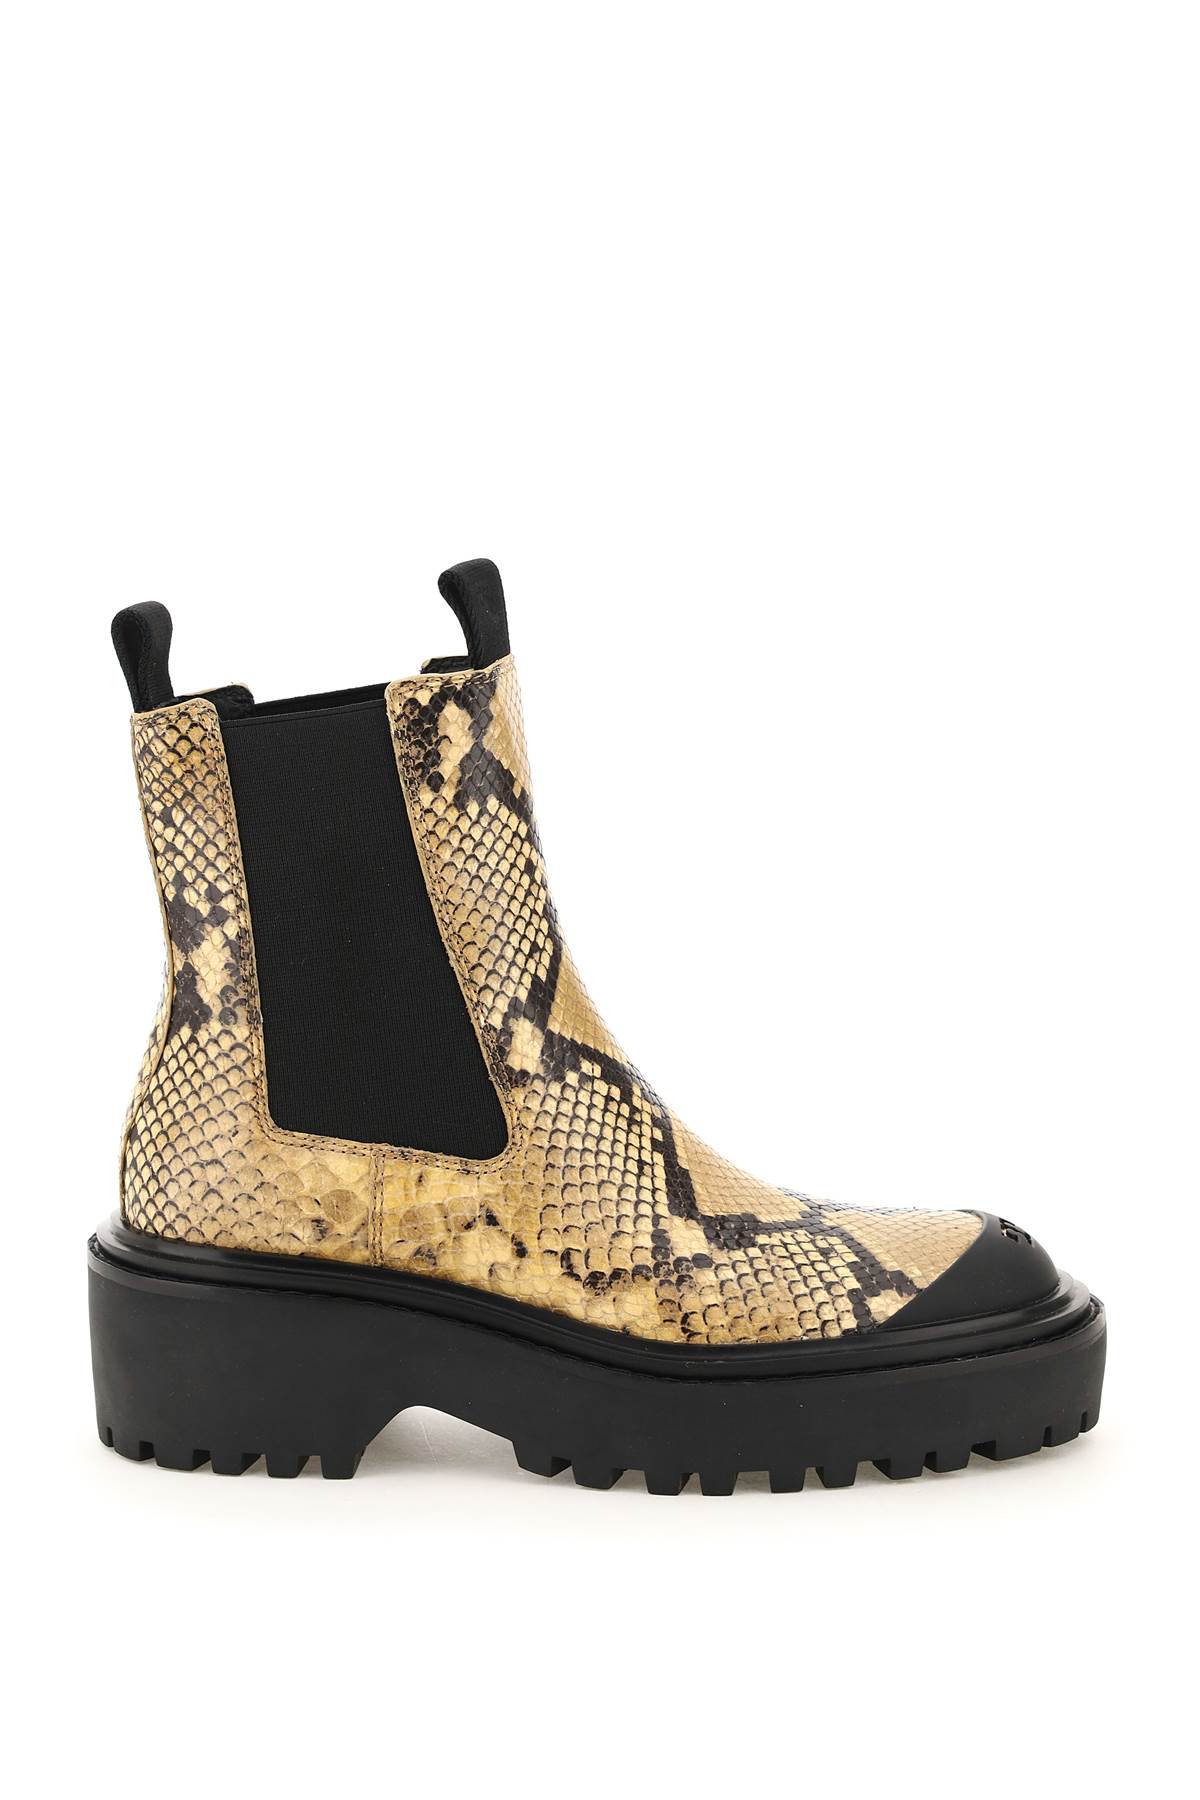 Tory Burch Python-printed Leather Chelsea Boots